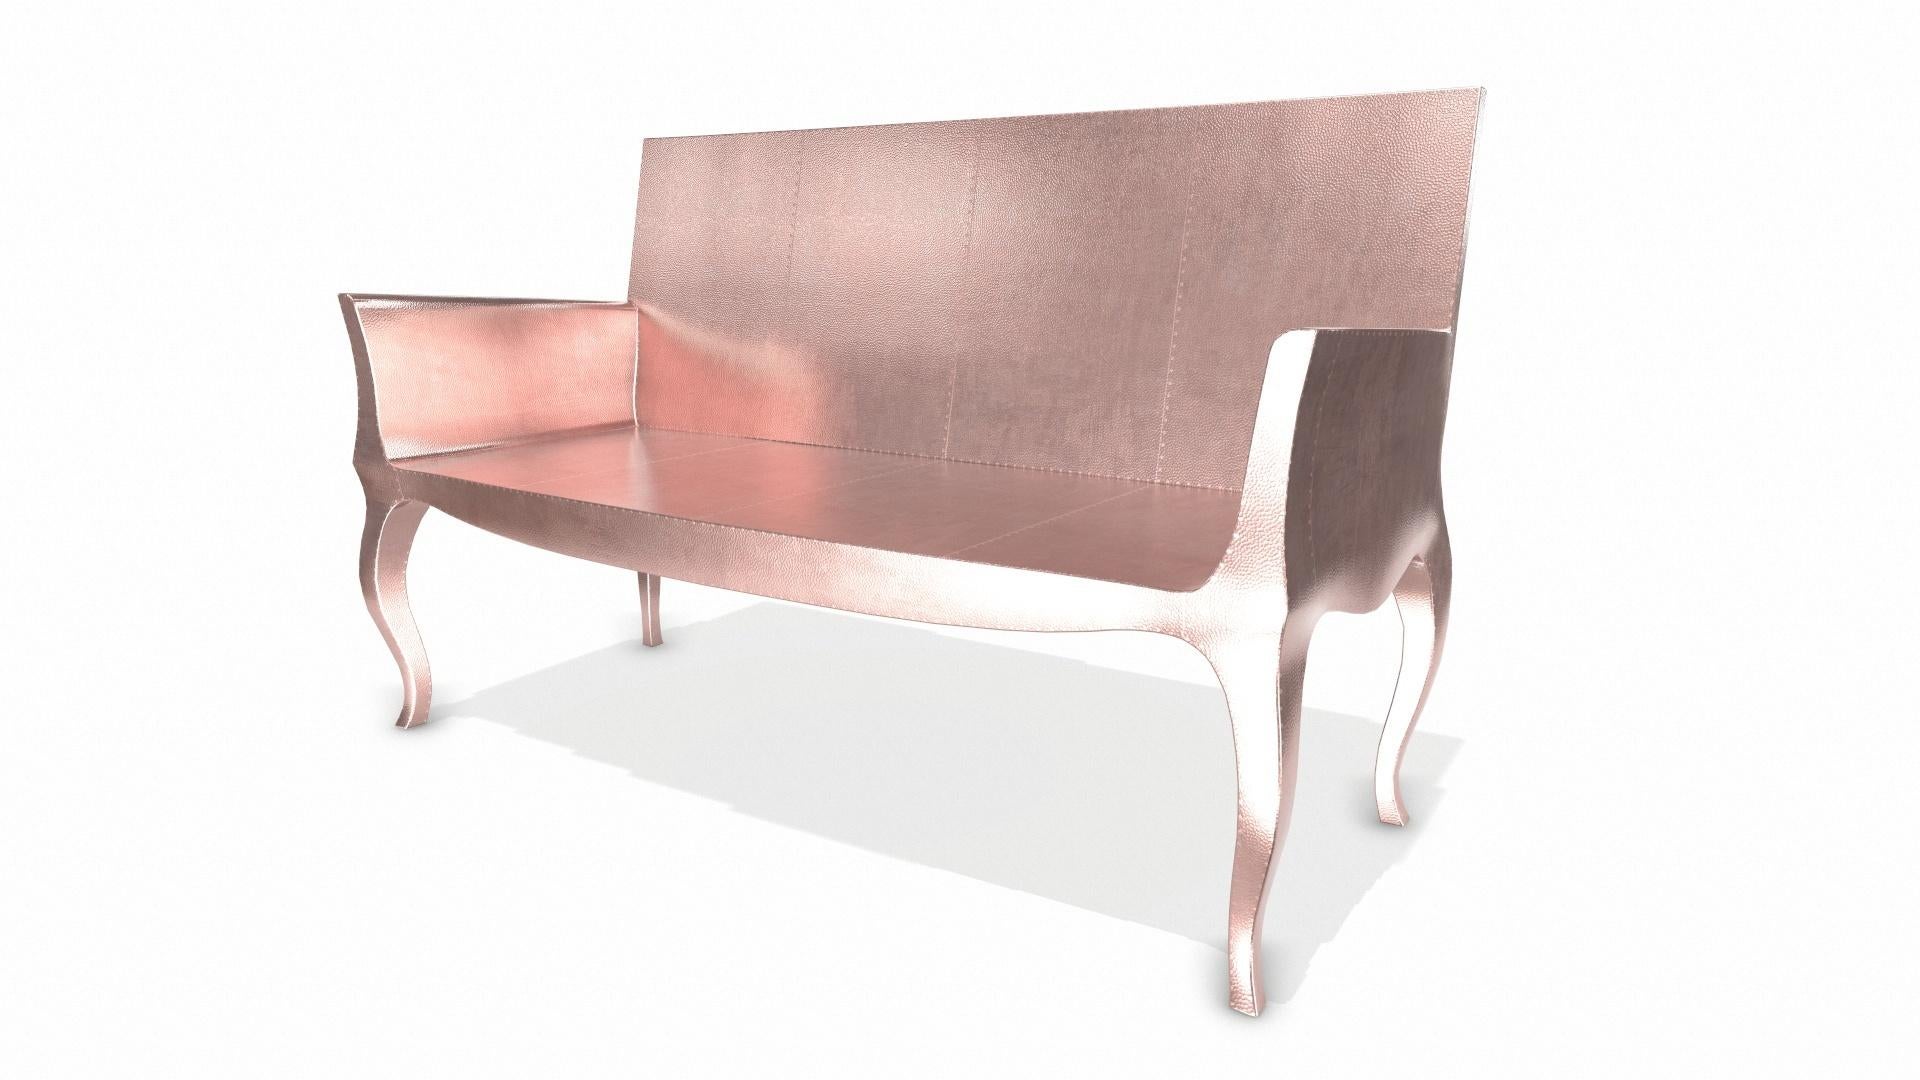 American Louise Settee Art Deco Canapes in Mid. Hammered Copper by Paul Mathieu For Sale